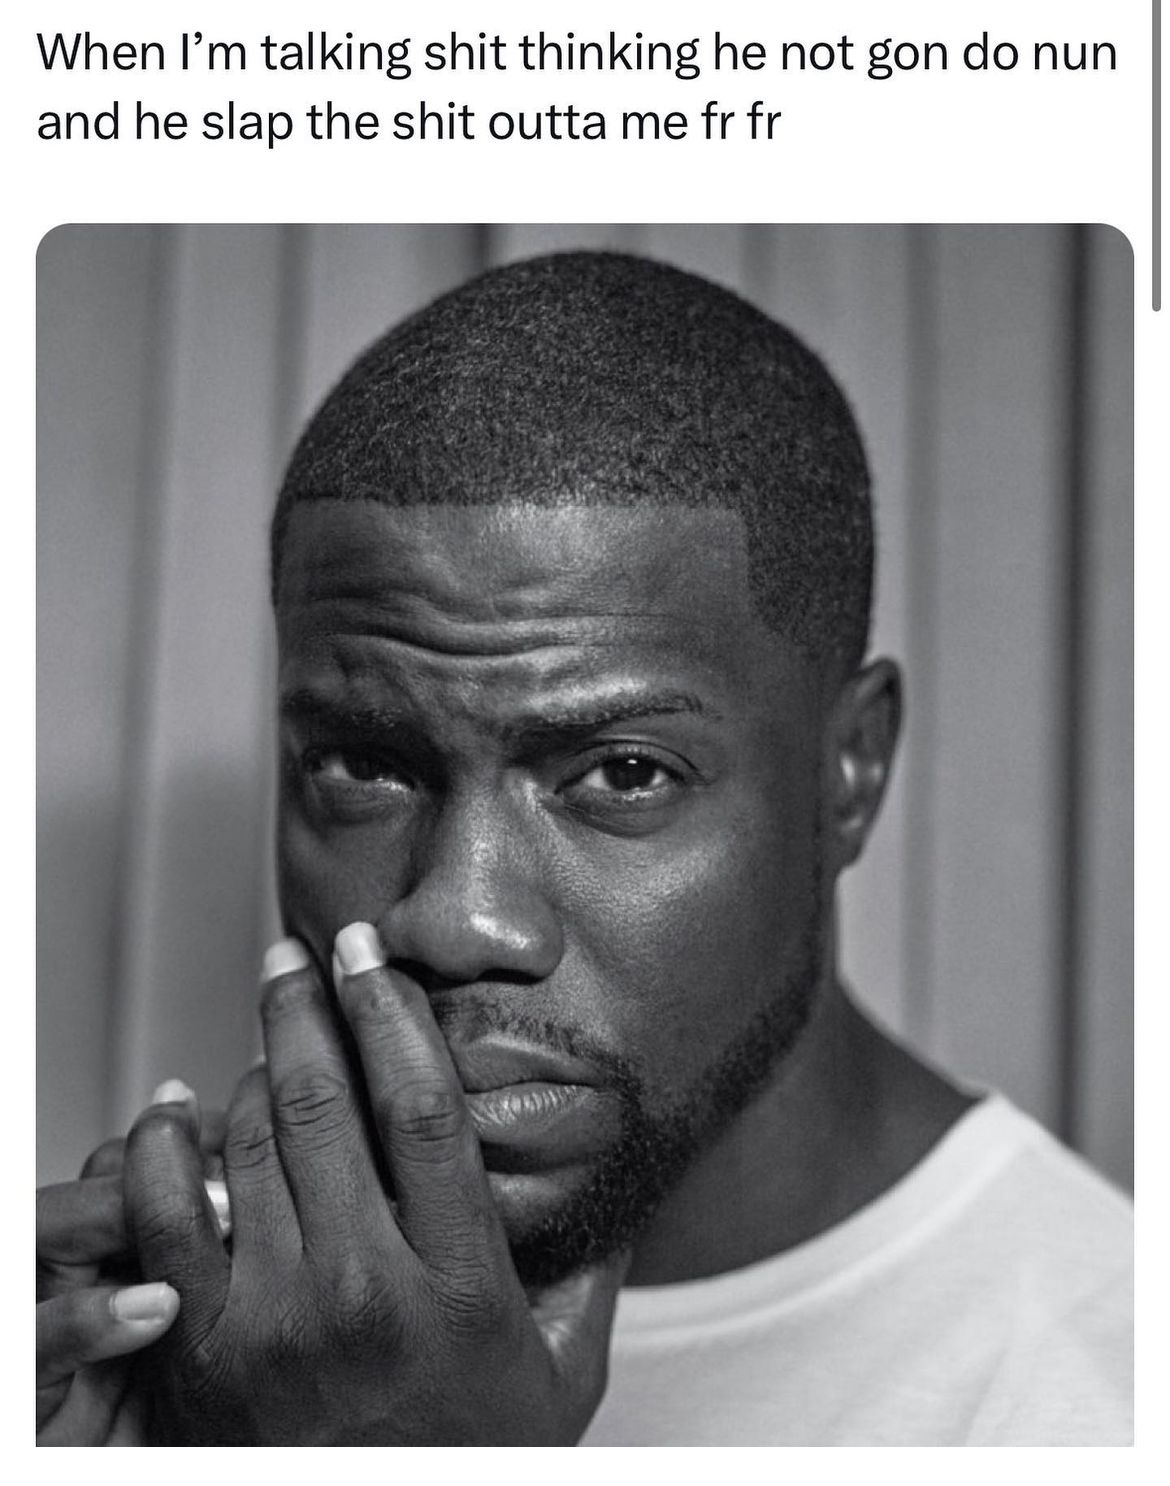 Kevin Hart trending memes - photo caption - When I'm talking shit thinking he not gon do nun and he slap the shit outta me fr fr